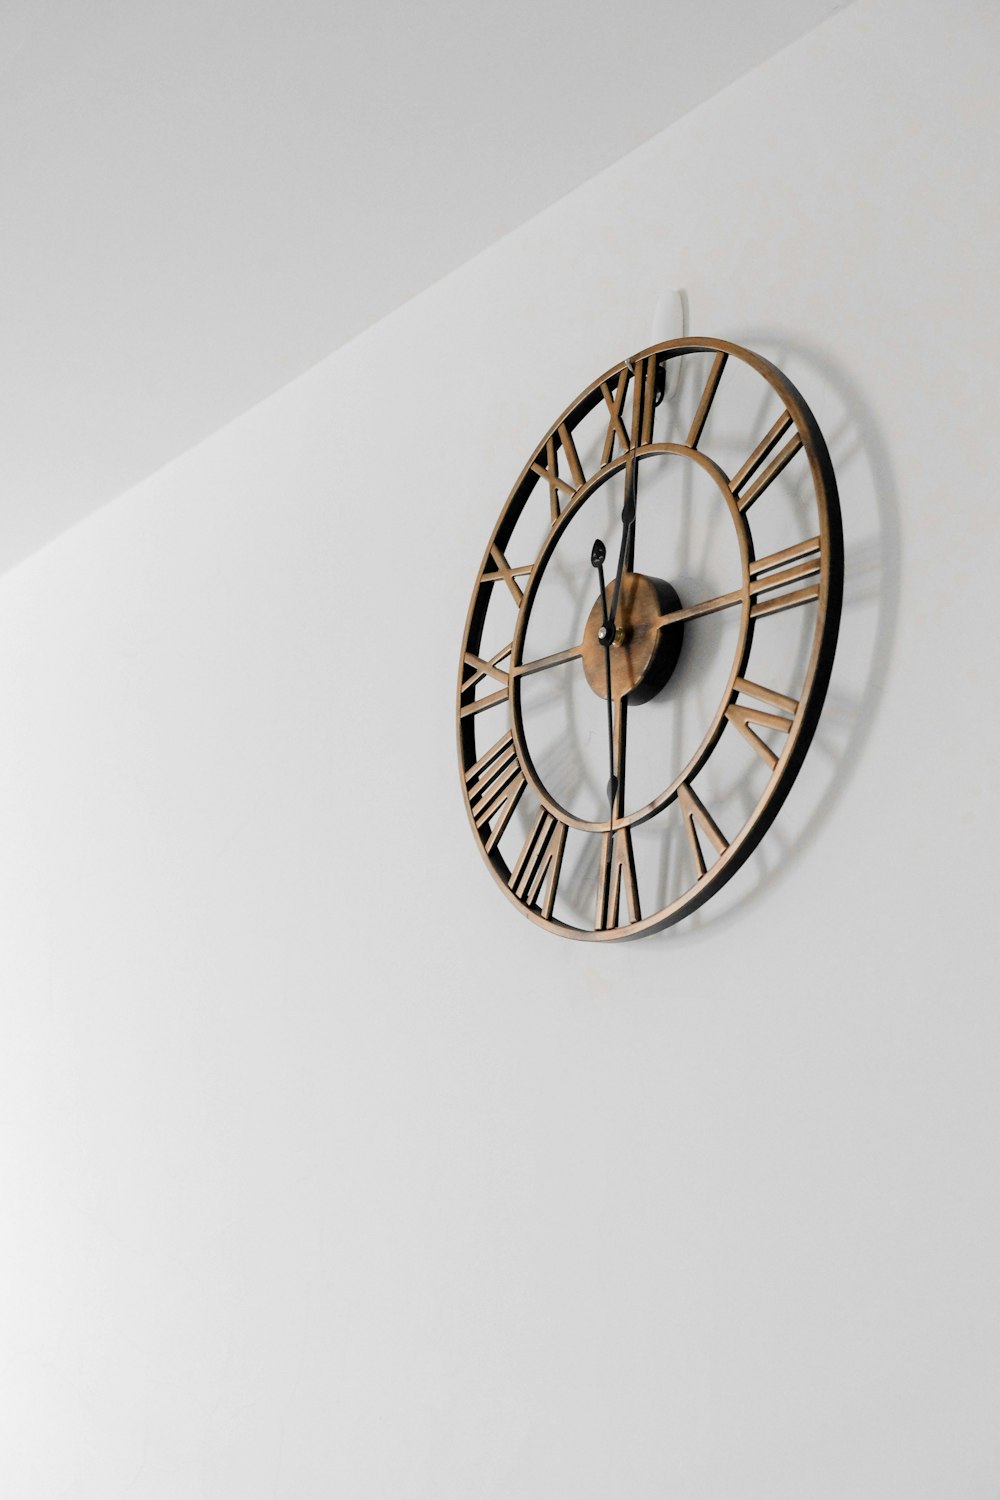 gold round wall clock on white painted wall